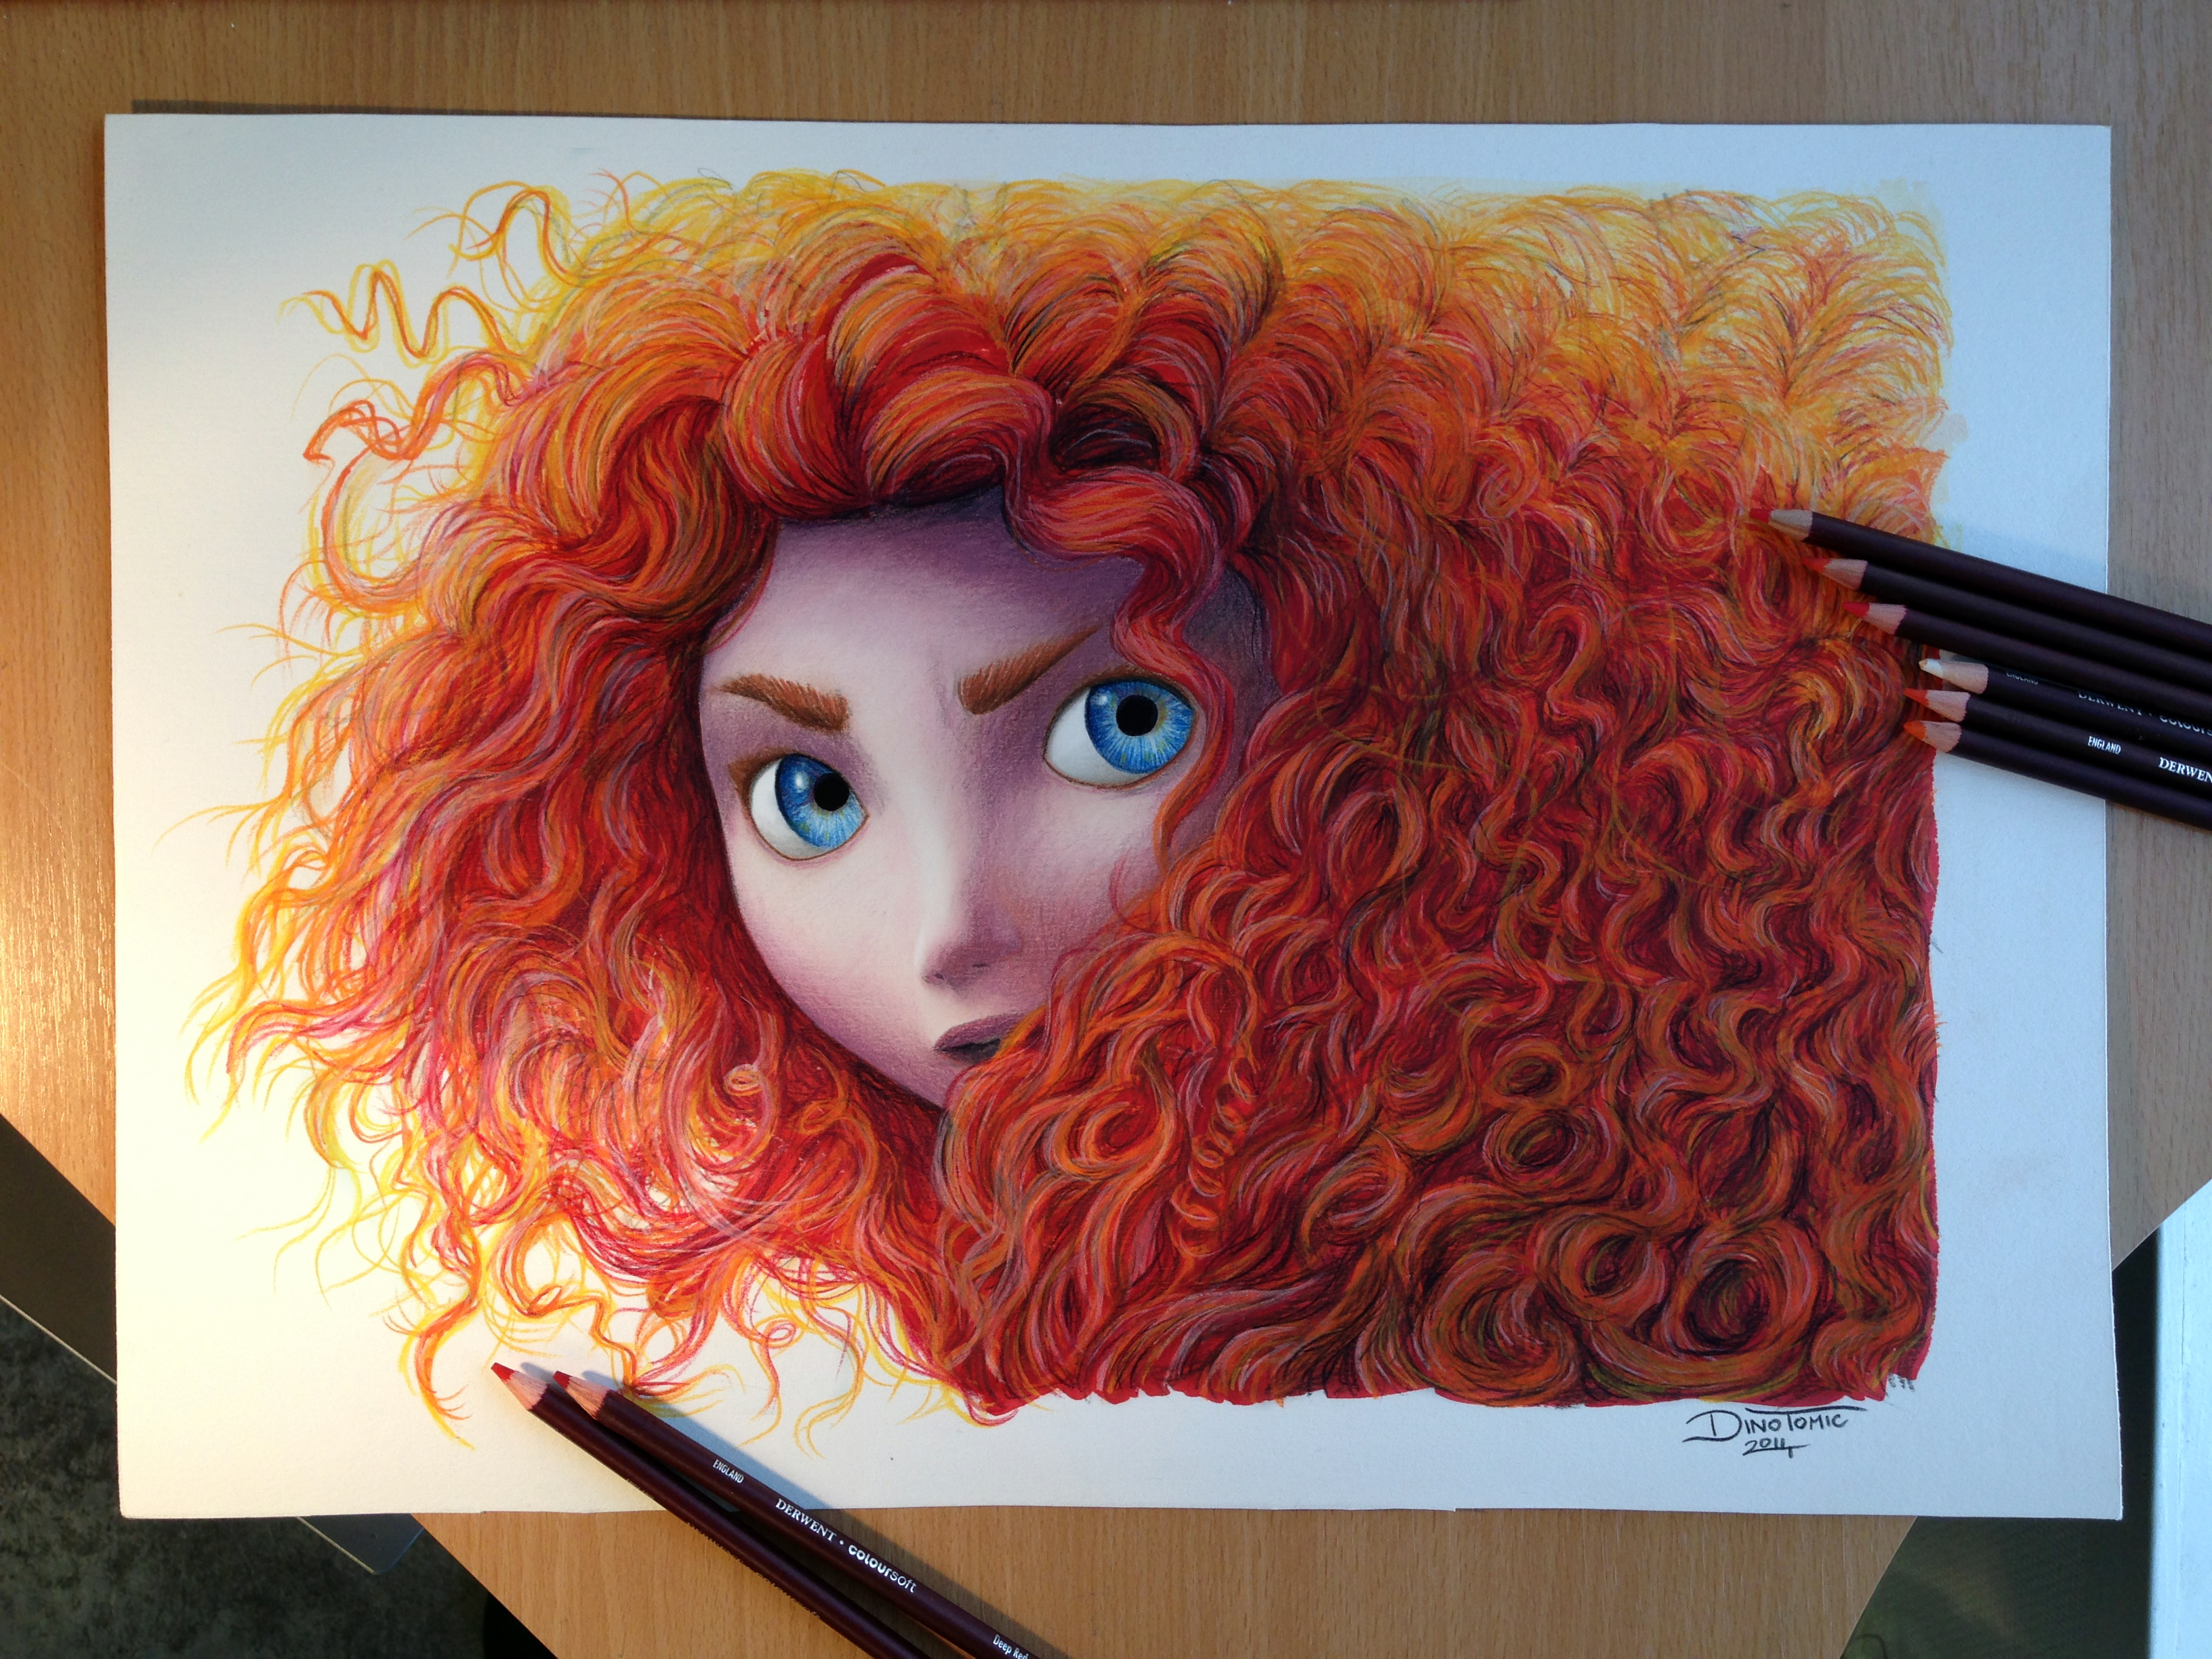 Merida color Pencil Drawing by AtomiccircuS on DeviantArt